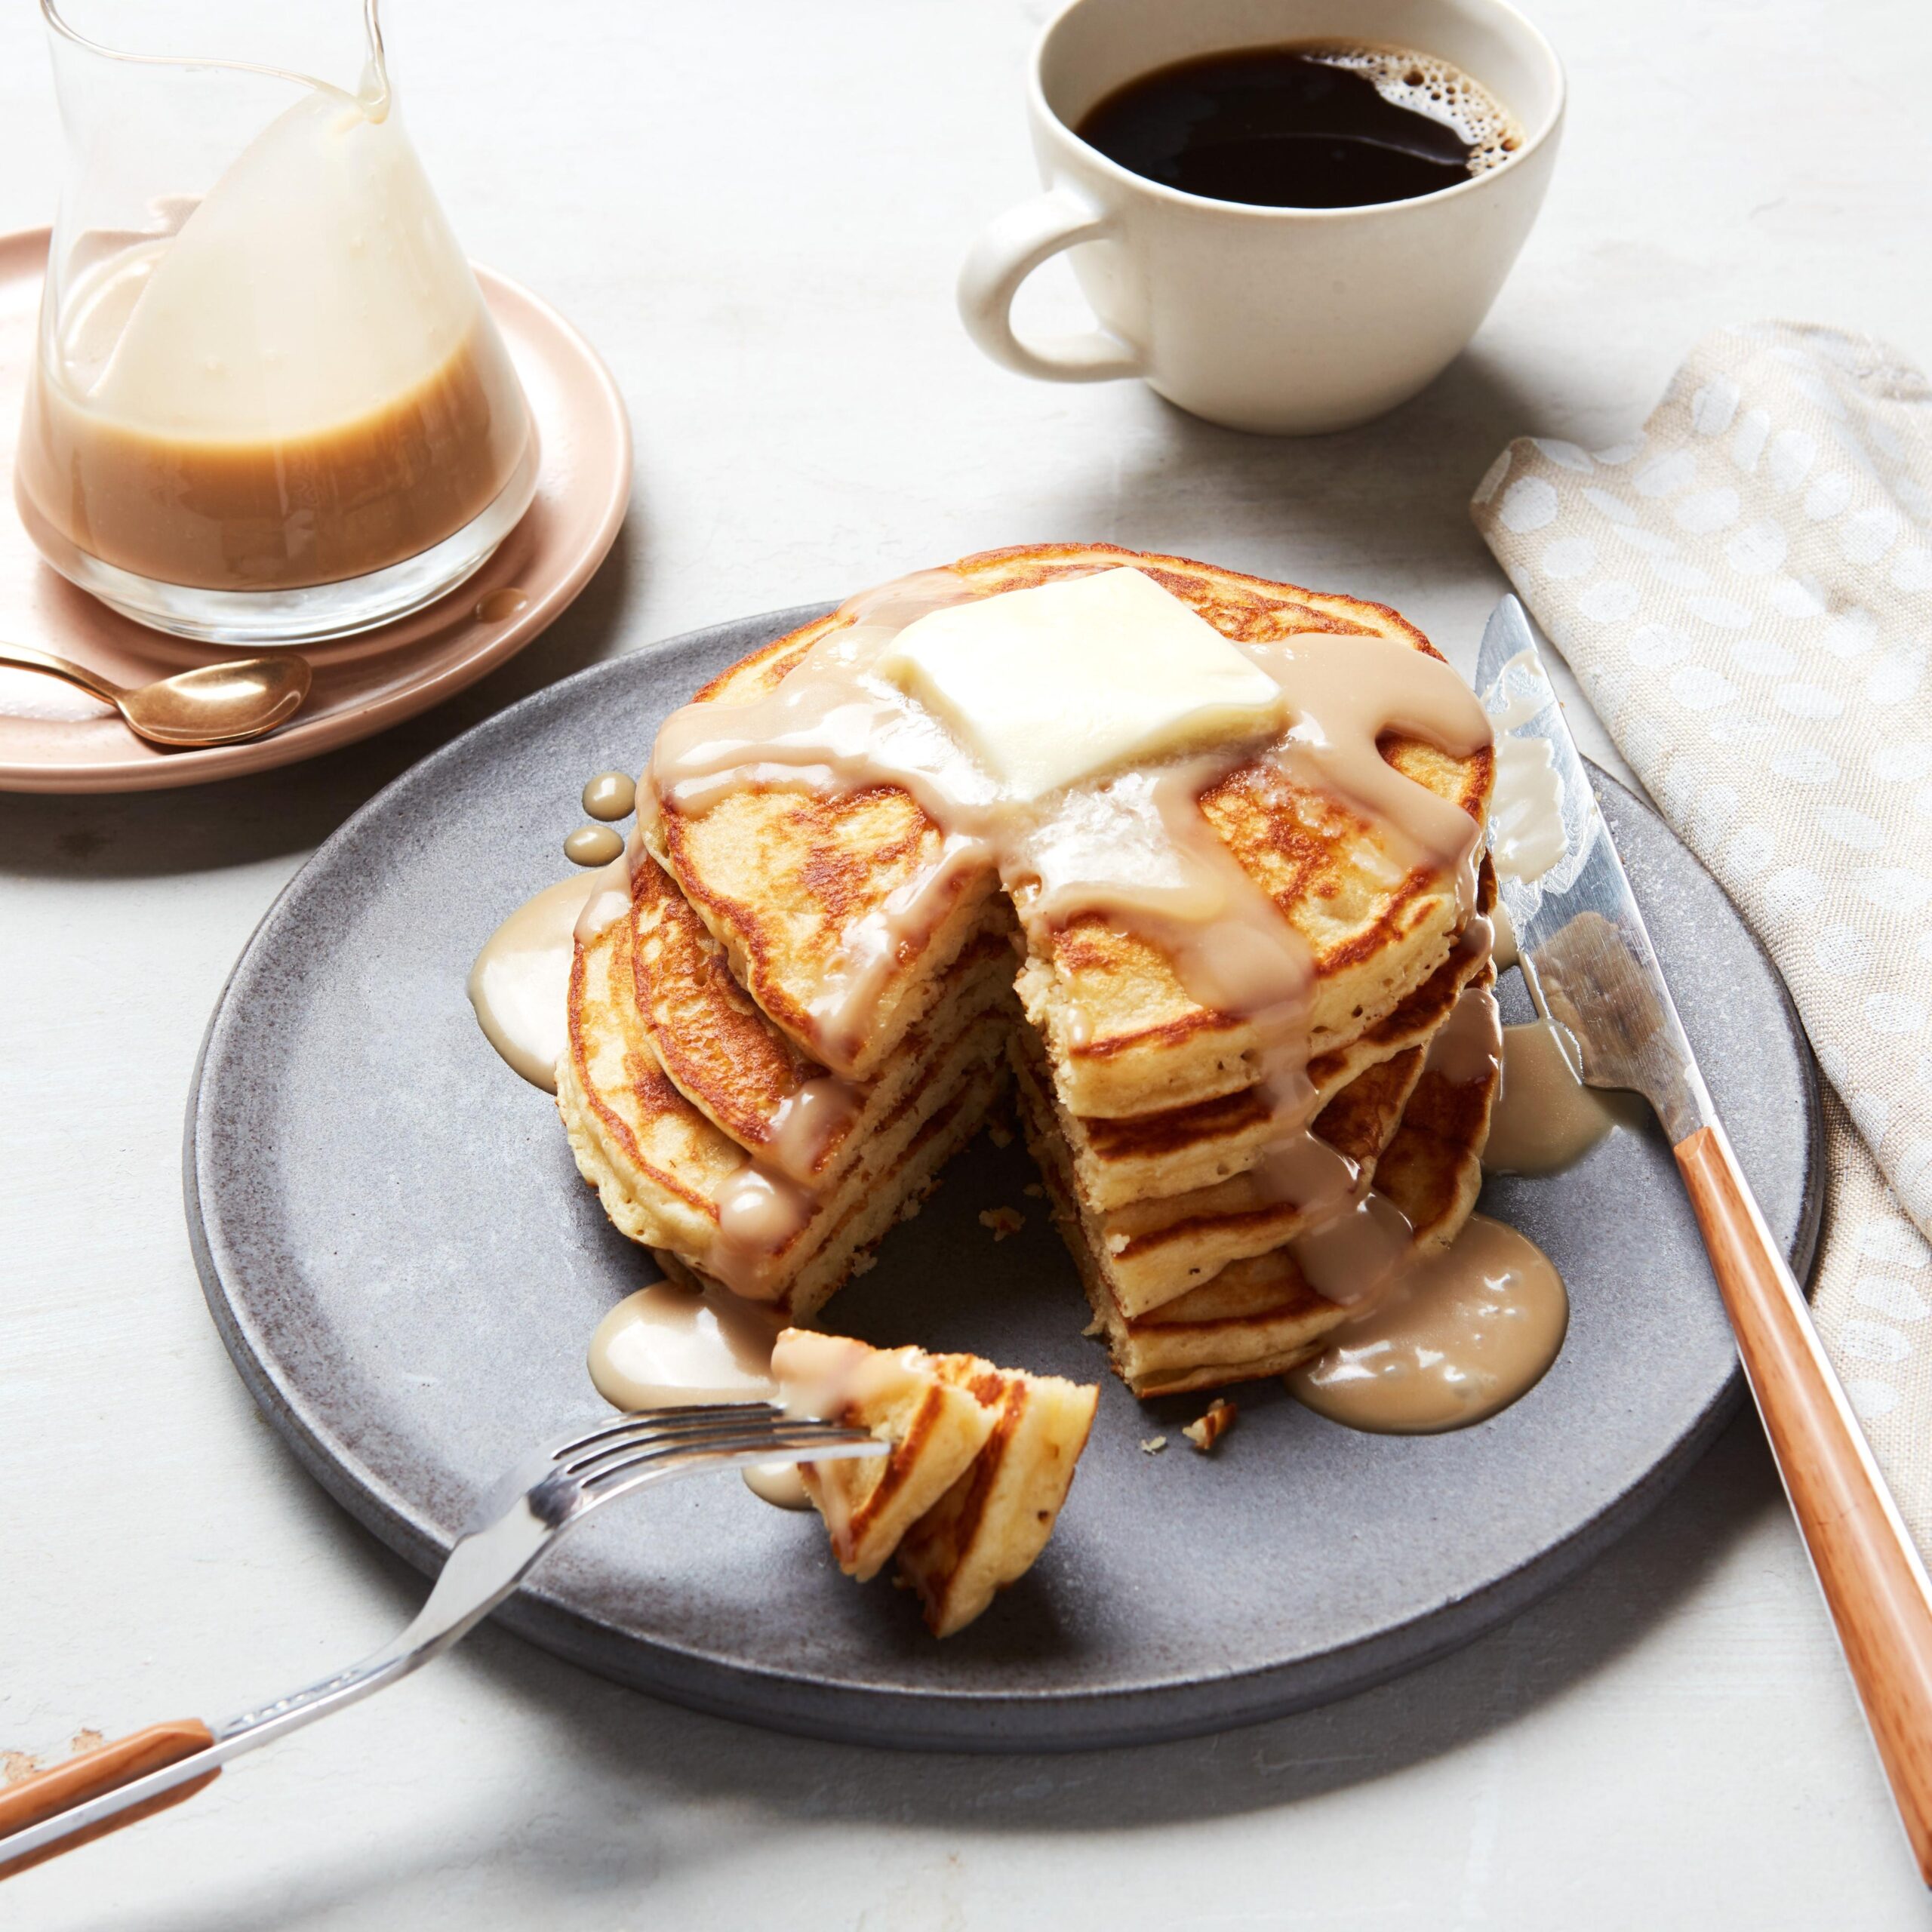  Upgrade your morning routine and enjoy a cup of joe in a whole new way with these coffee creamer pancakes ☕️🥞